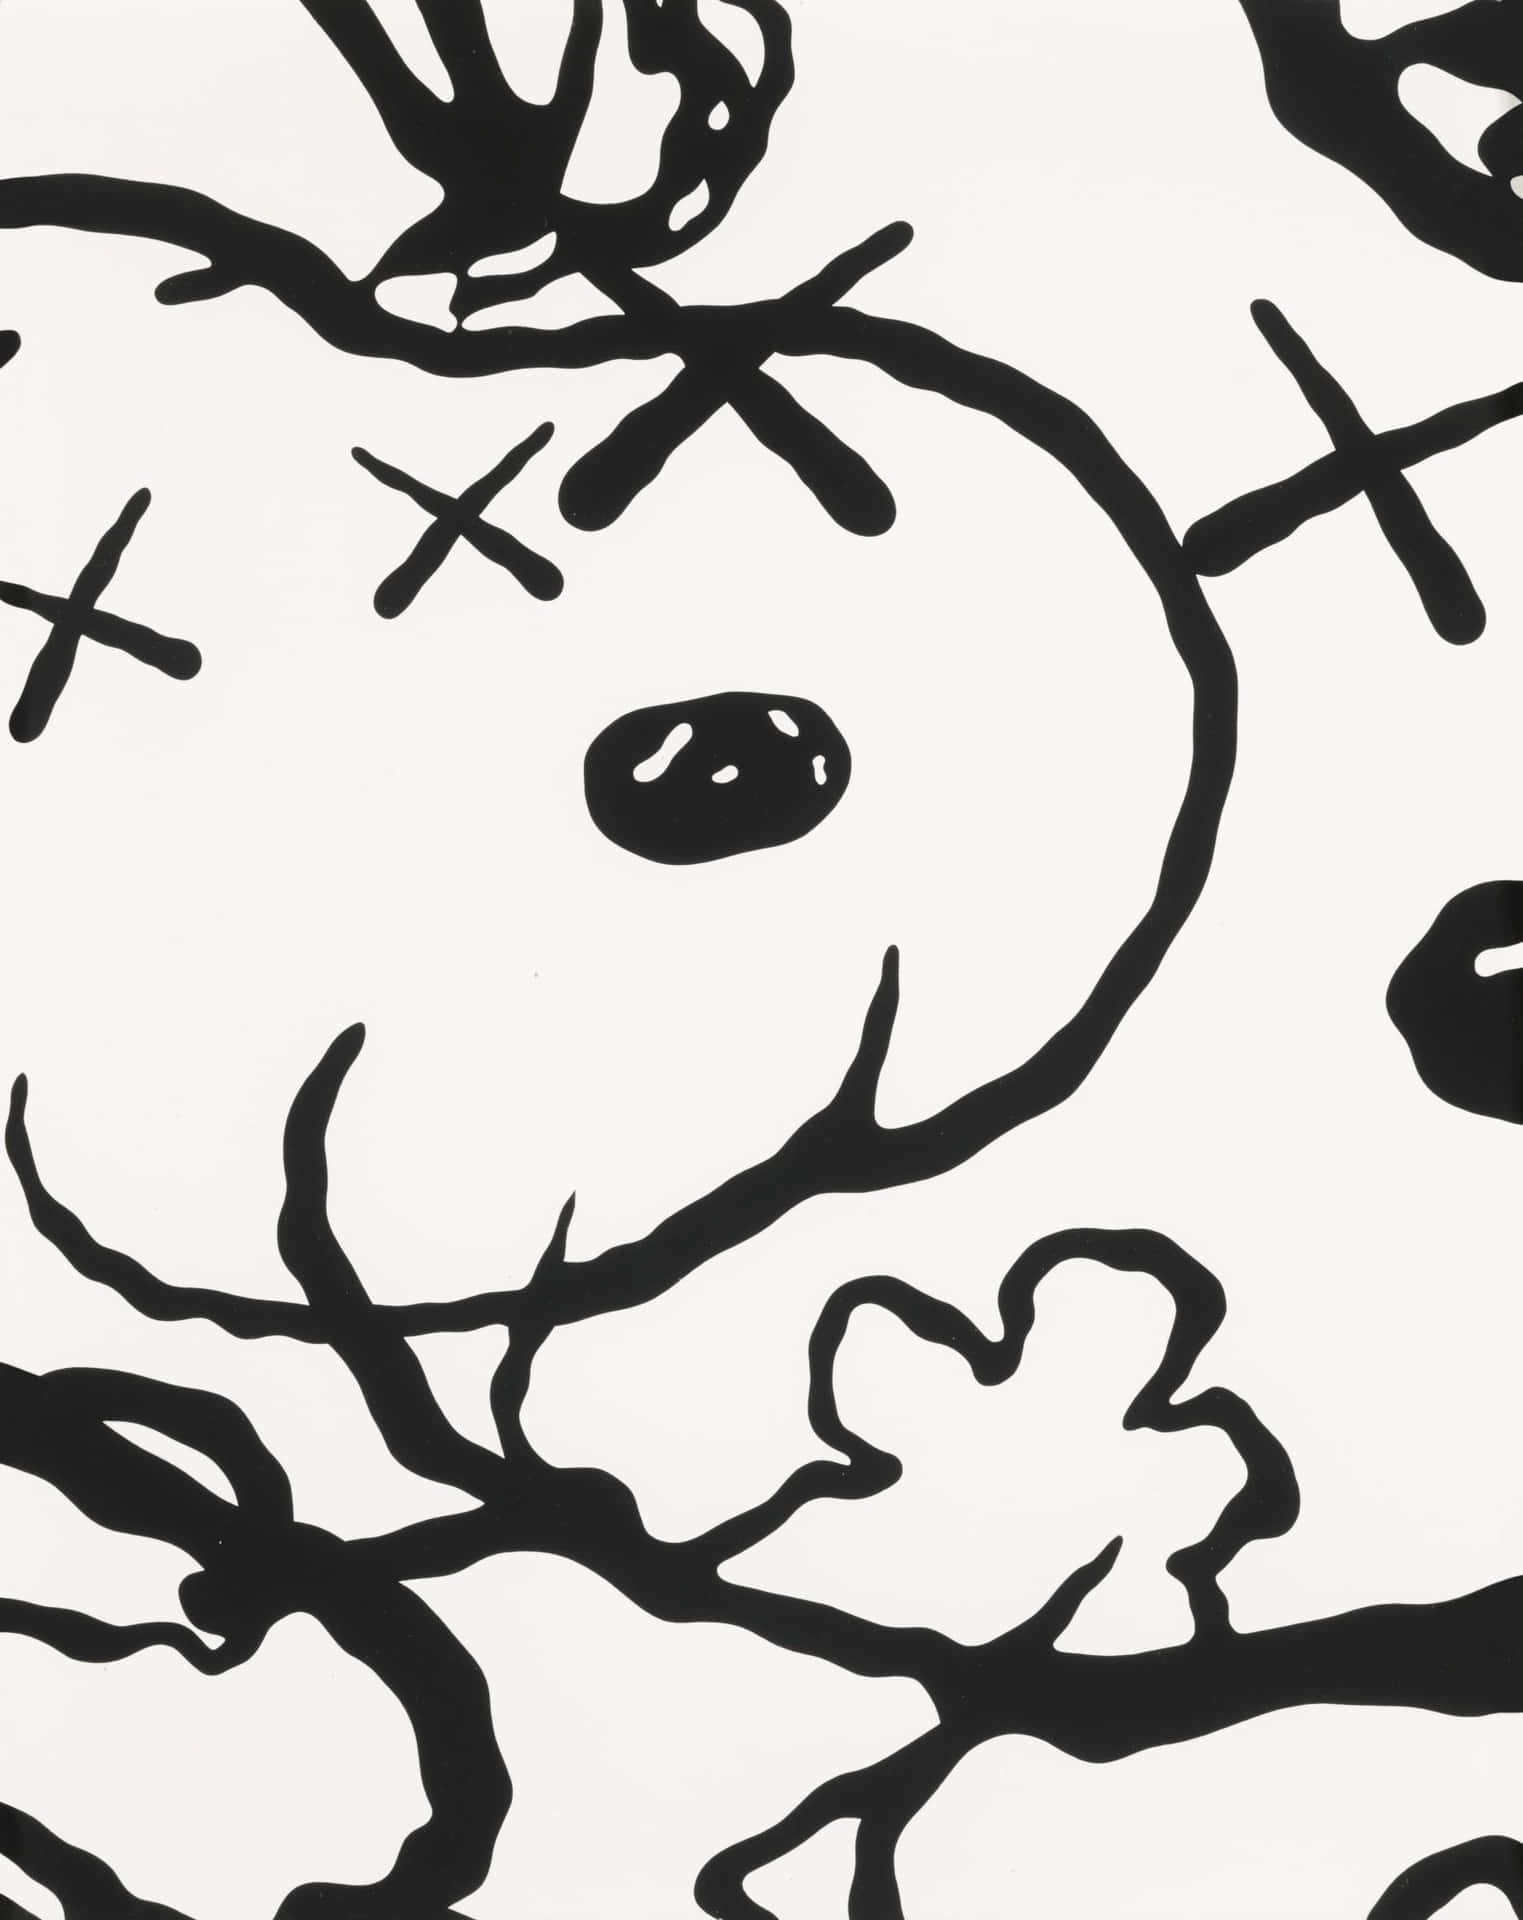 Iconic Kaws X Snoopy artwork collaboration featuring Snoopy embracing a Kaws companion in a display of friendship. Wallpaper